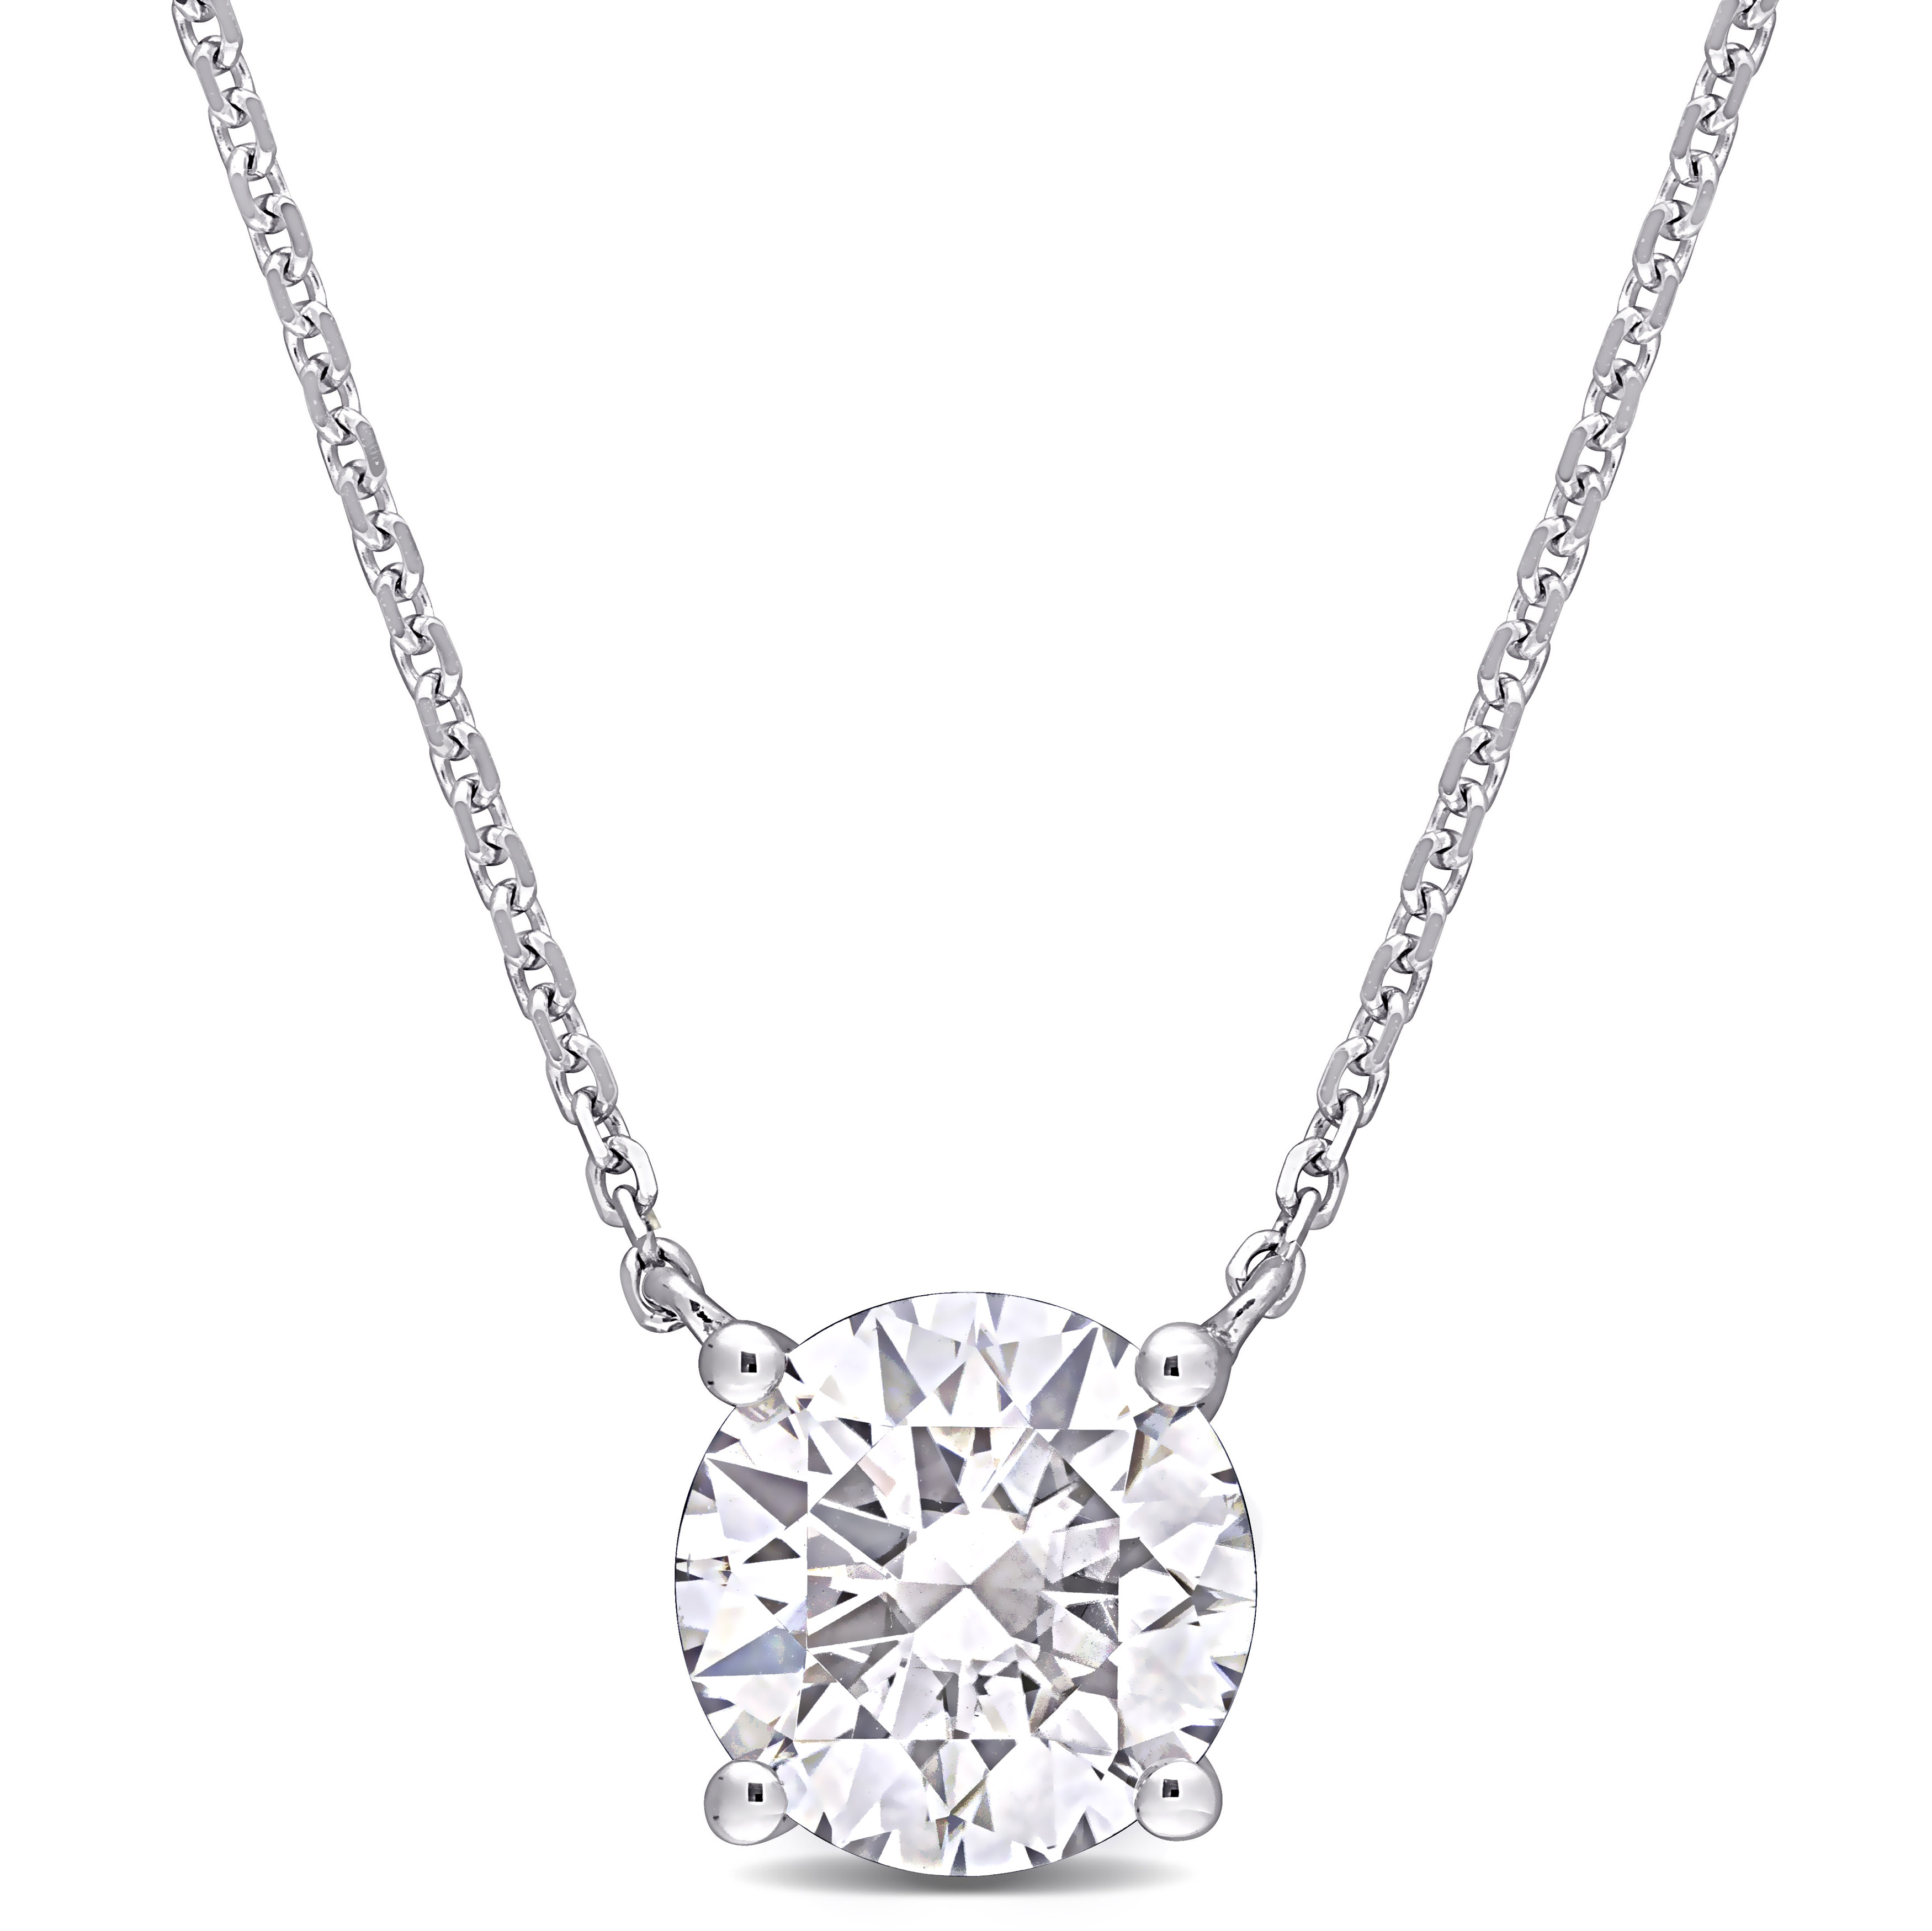 1 4/5 CT TGW Created Moissanite Solitaire Pendant With Chain in 14k White Gold